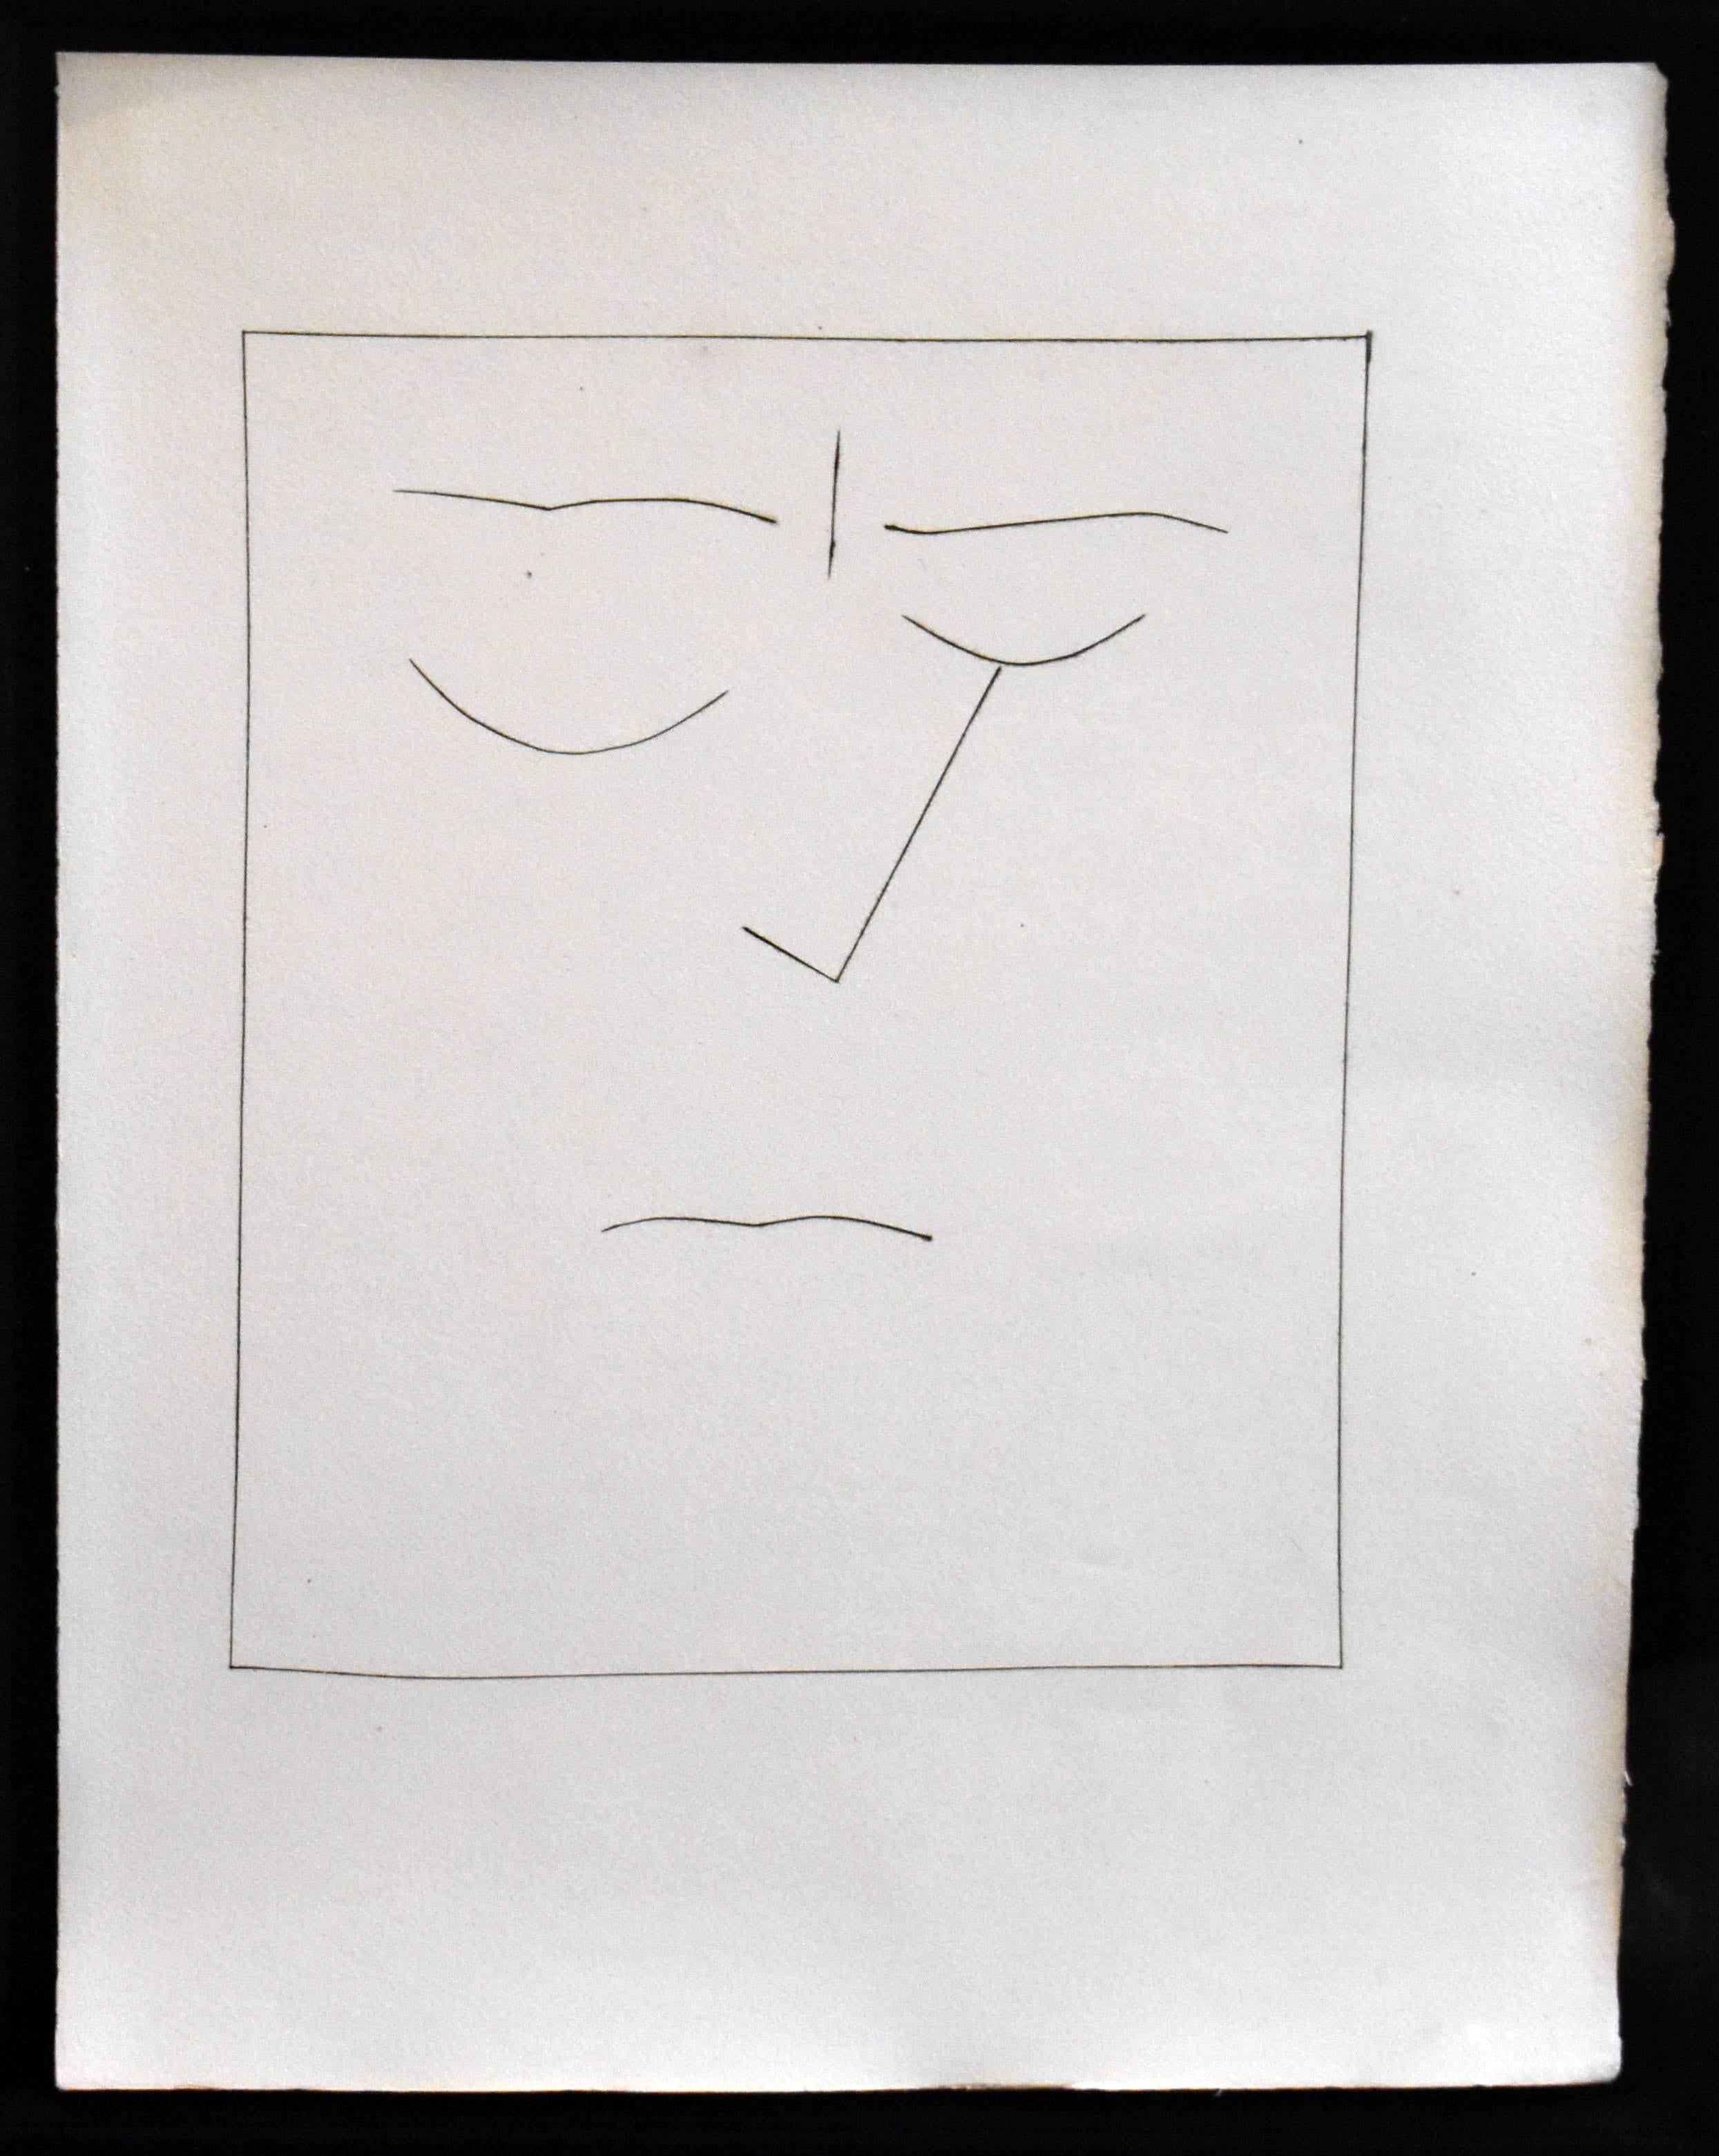 Artist: Pablo Picasso
Medium: Original copper plate with cancellation mark with matching etching on Montval wove paper
Title: Square Head of a Man with Closed Eyes (Plate VIII)
Portfolio: Carmen
Year: 1949
Edition: One of a kind
Framed Size: 17 3/8